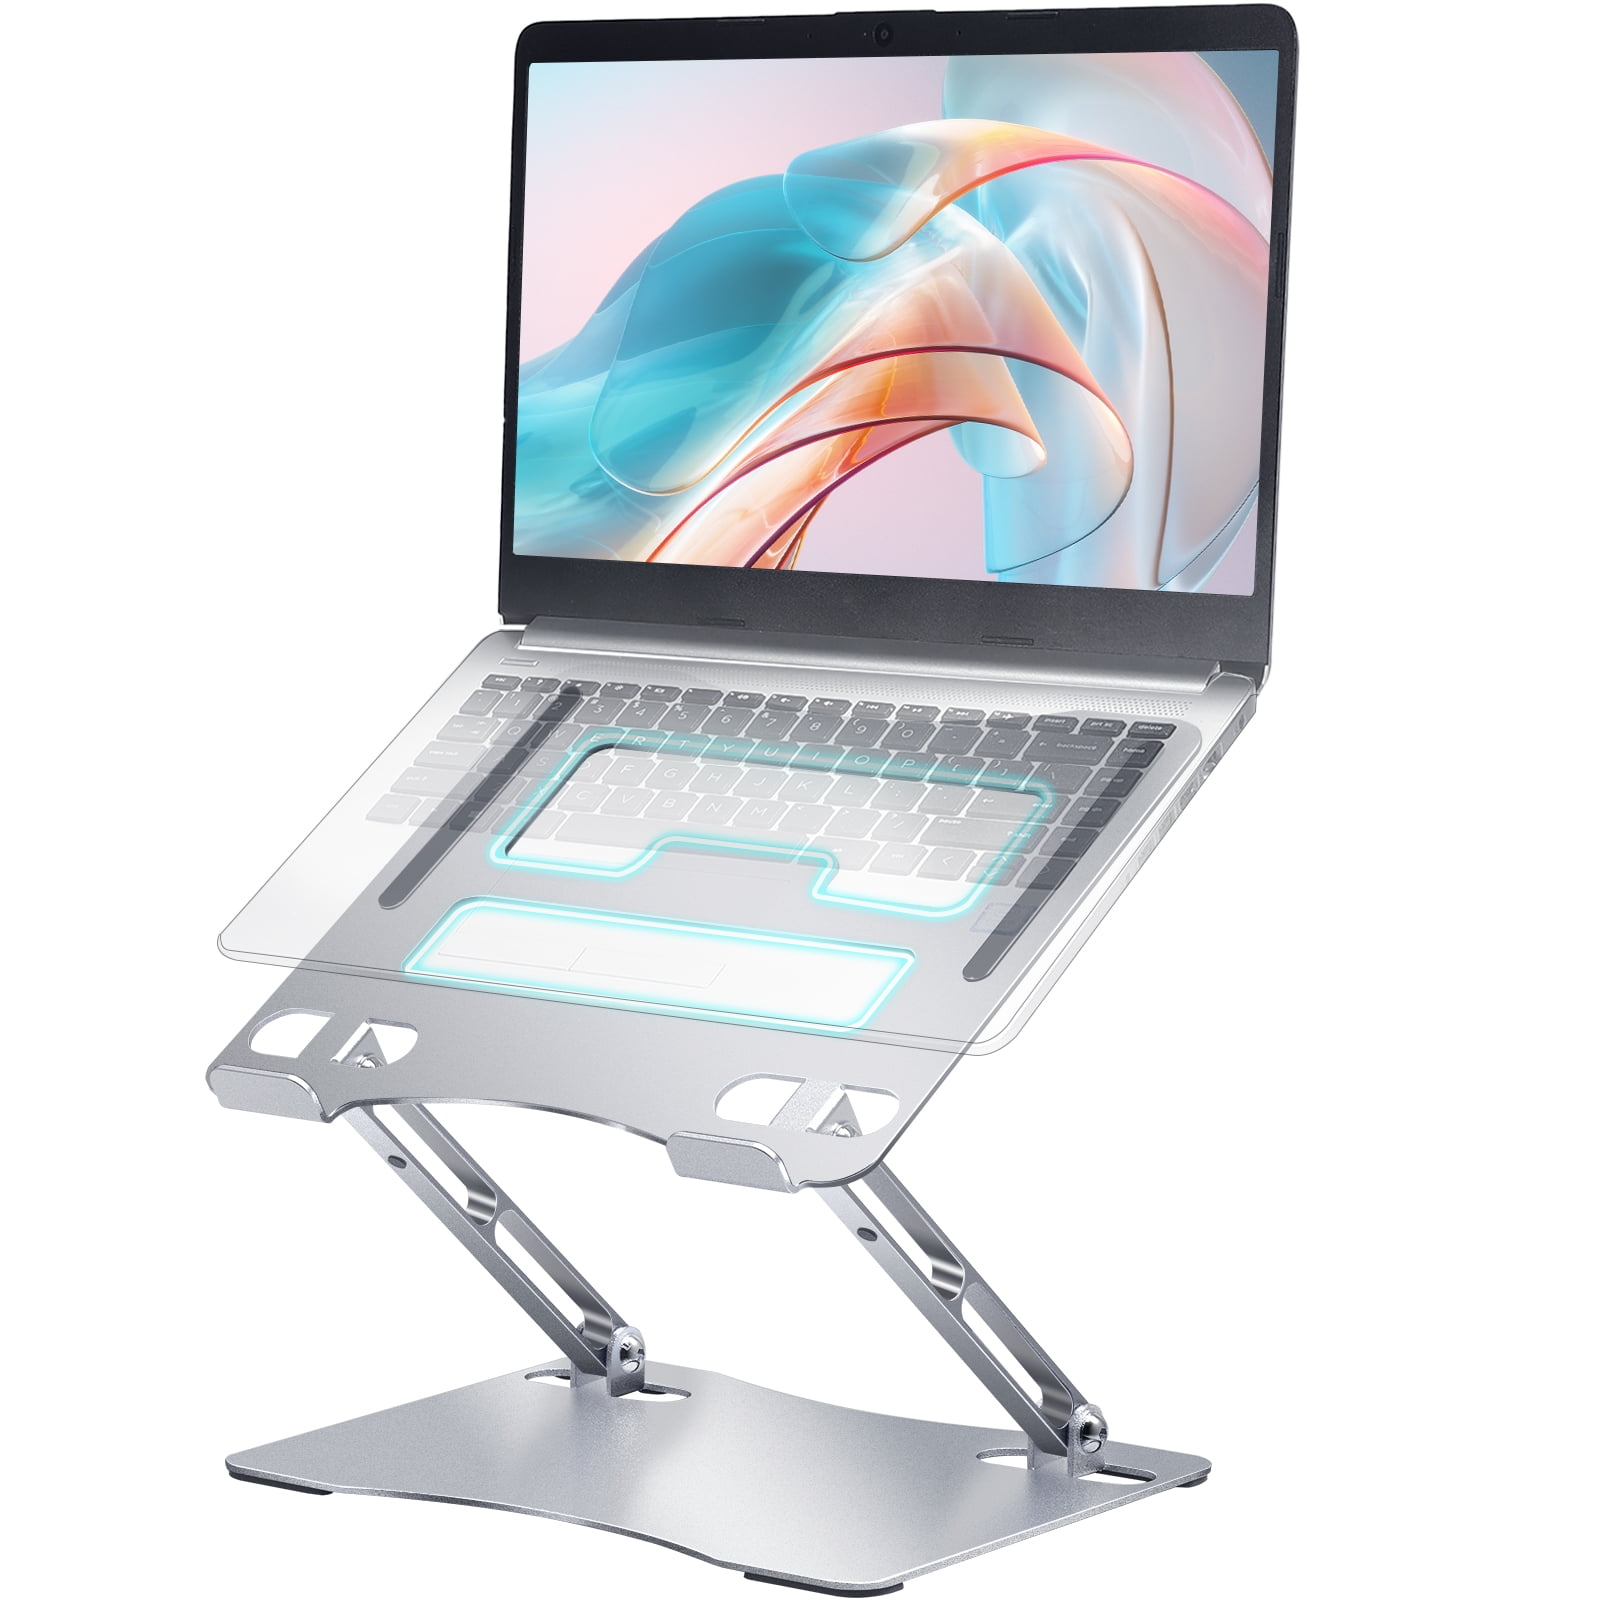 UGREEN Vertical Laptop Stand Holder Foldable Aluminum Notebook Stand Laptop  Tablet Stand Support For Macbook Air Pro PC 17 inch